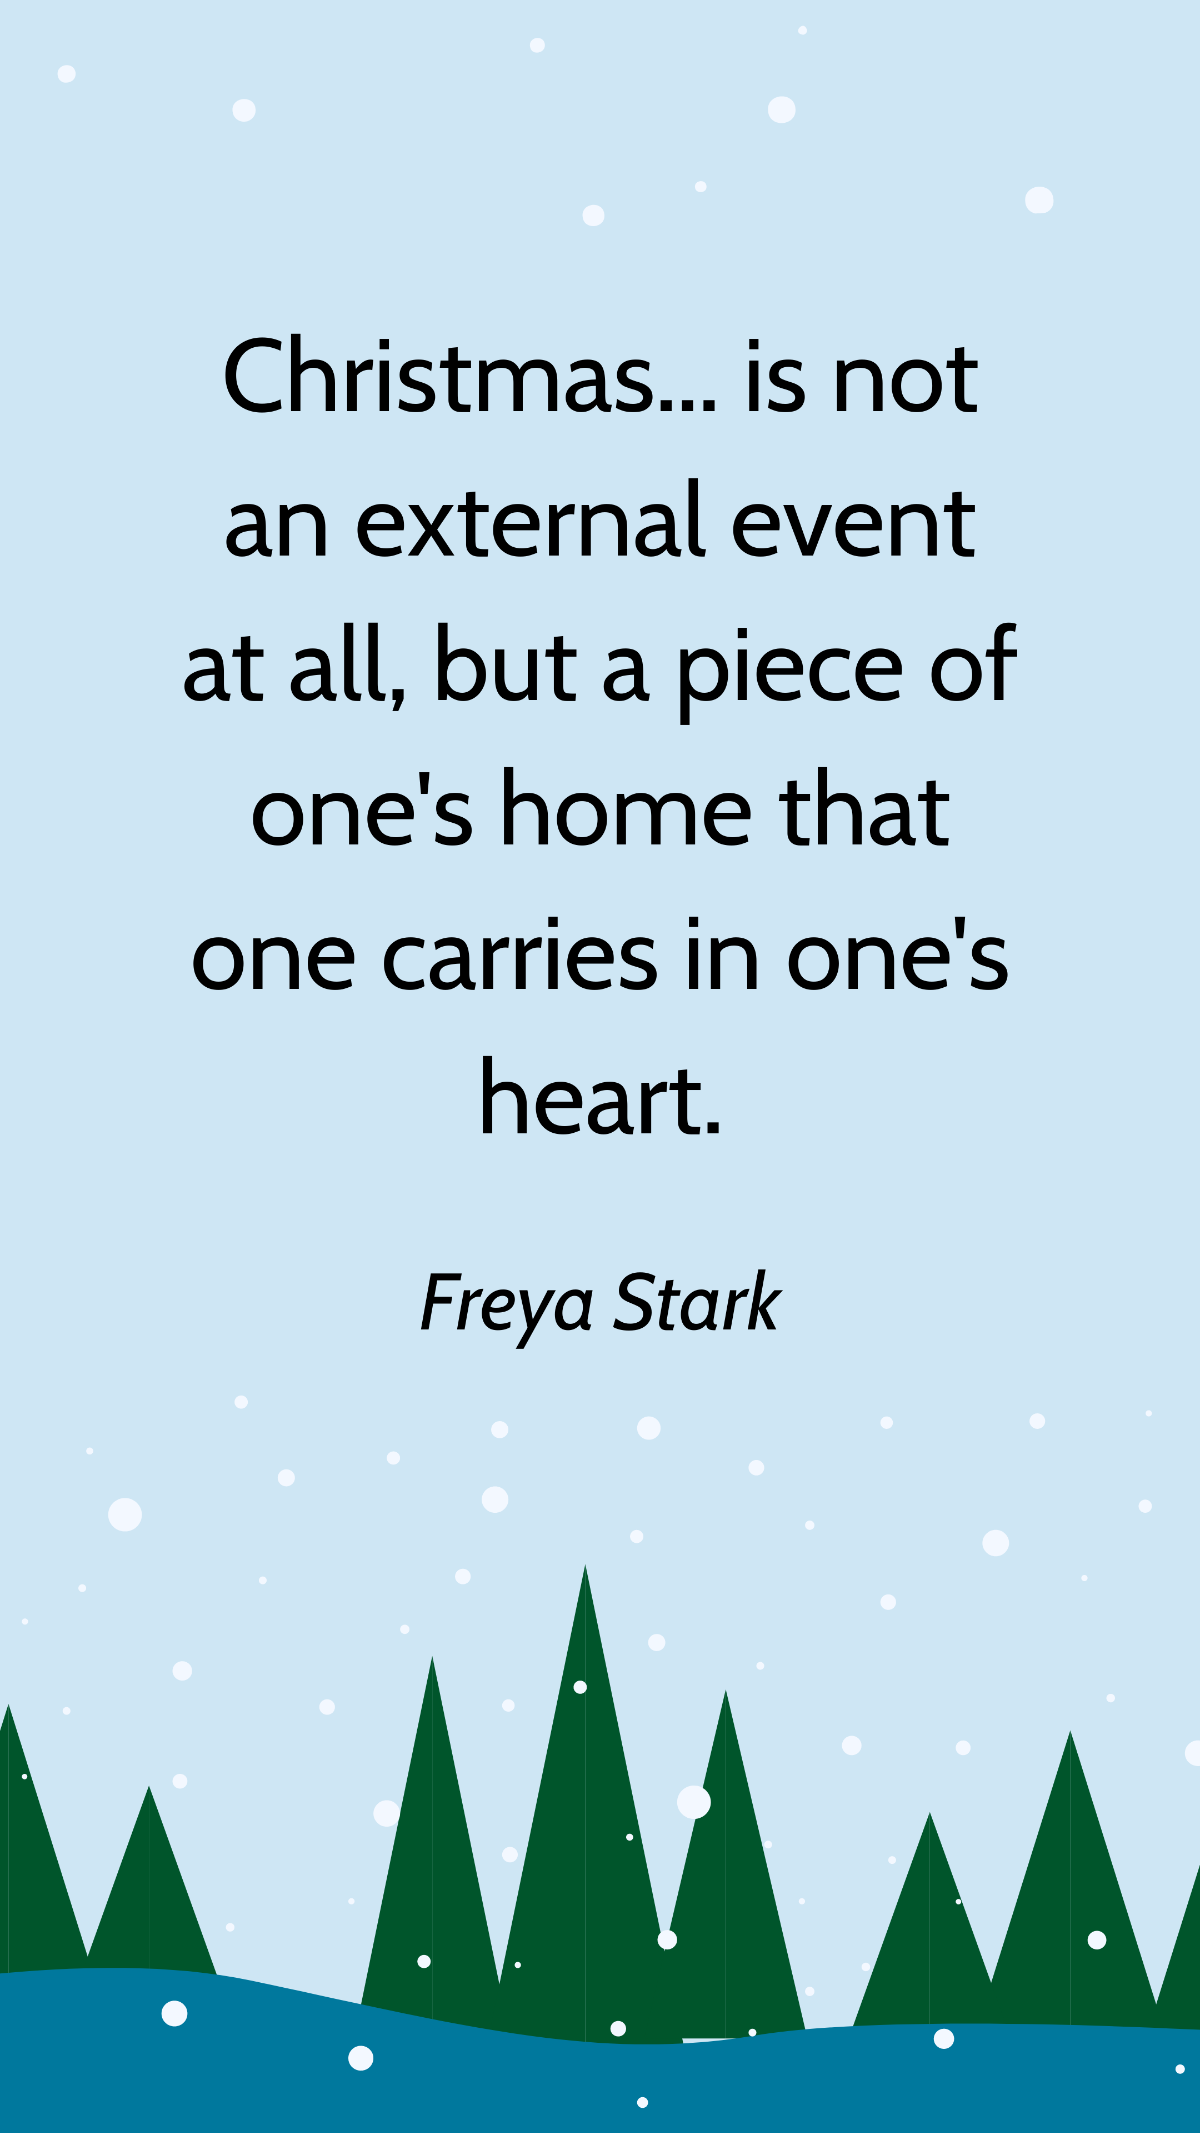 Freya Stark - Christmas... is not an external event at all, but a piece of one's home that one carries in one's heart. Template